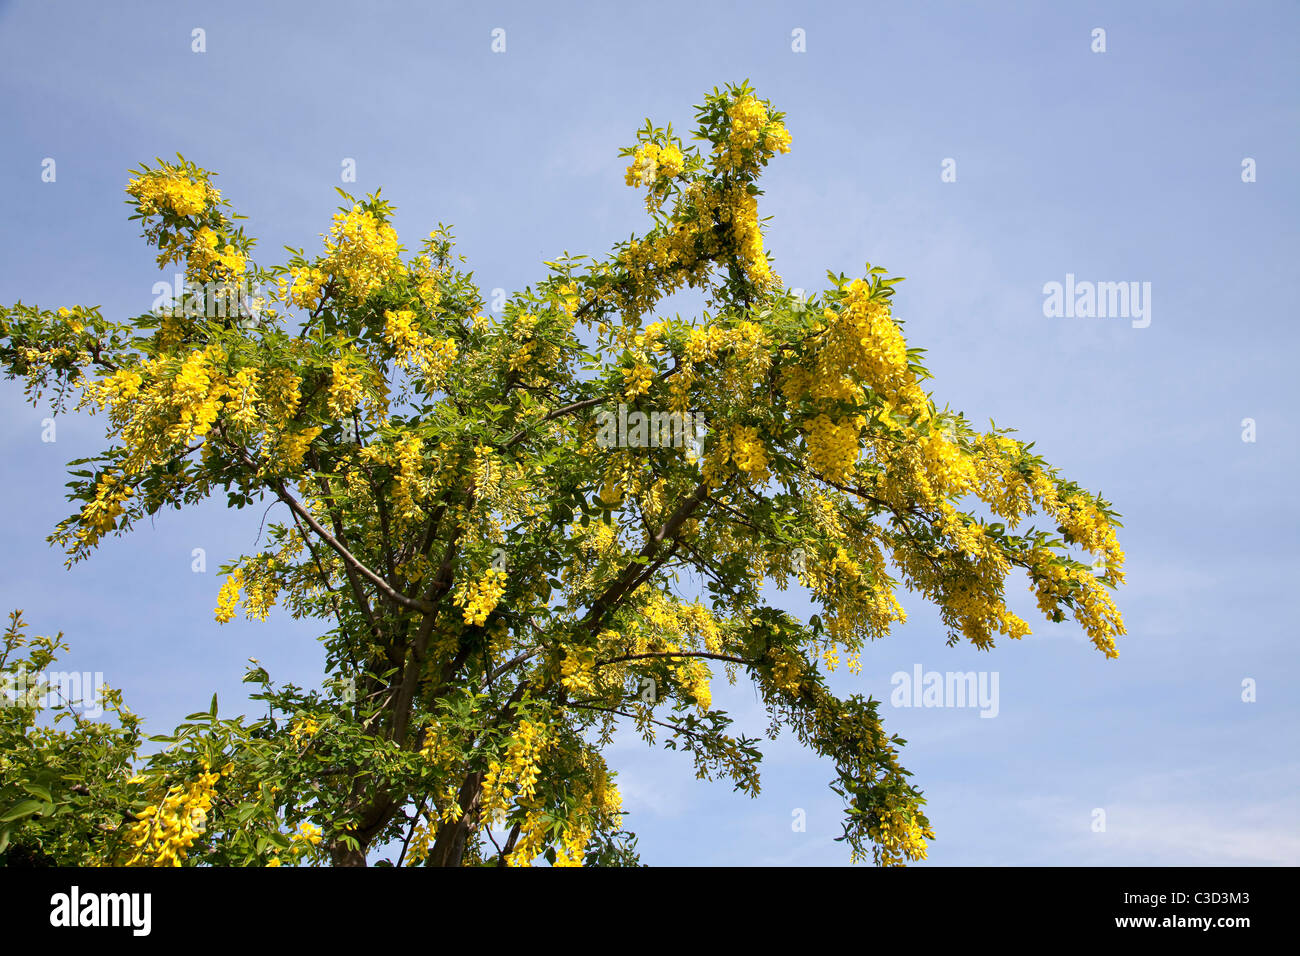 Laburnum tree Laburnum anagyroides in full flower in early spring in the UK Stock Photo